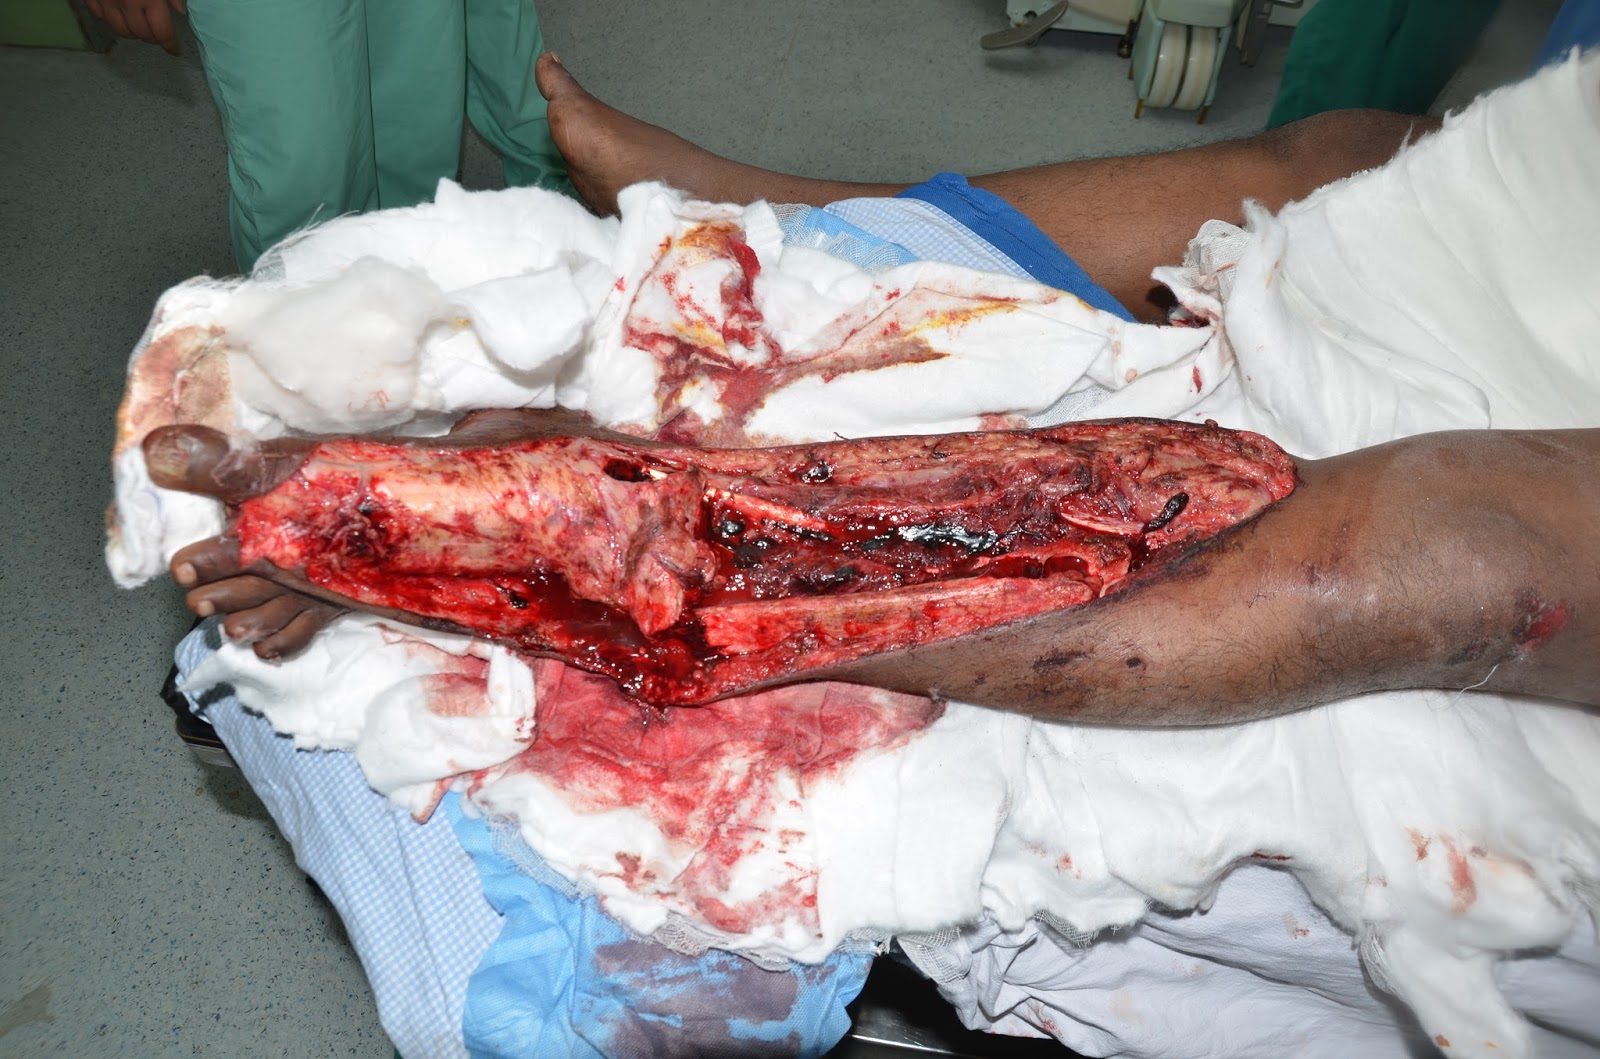 CRUSH INJURY FOOT, LOWER LIMB INJURIES AND LIMB SALVAGE: MAJOR CRUSH INJURY  LEFT LEG WITH SEGMENTAL FRACTURE TIBIA WITH ANKLE DISLOCATION - SALVAGE OF  FAILED CROSS LEG FLAP